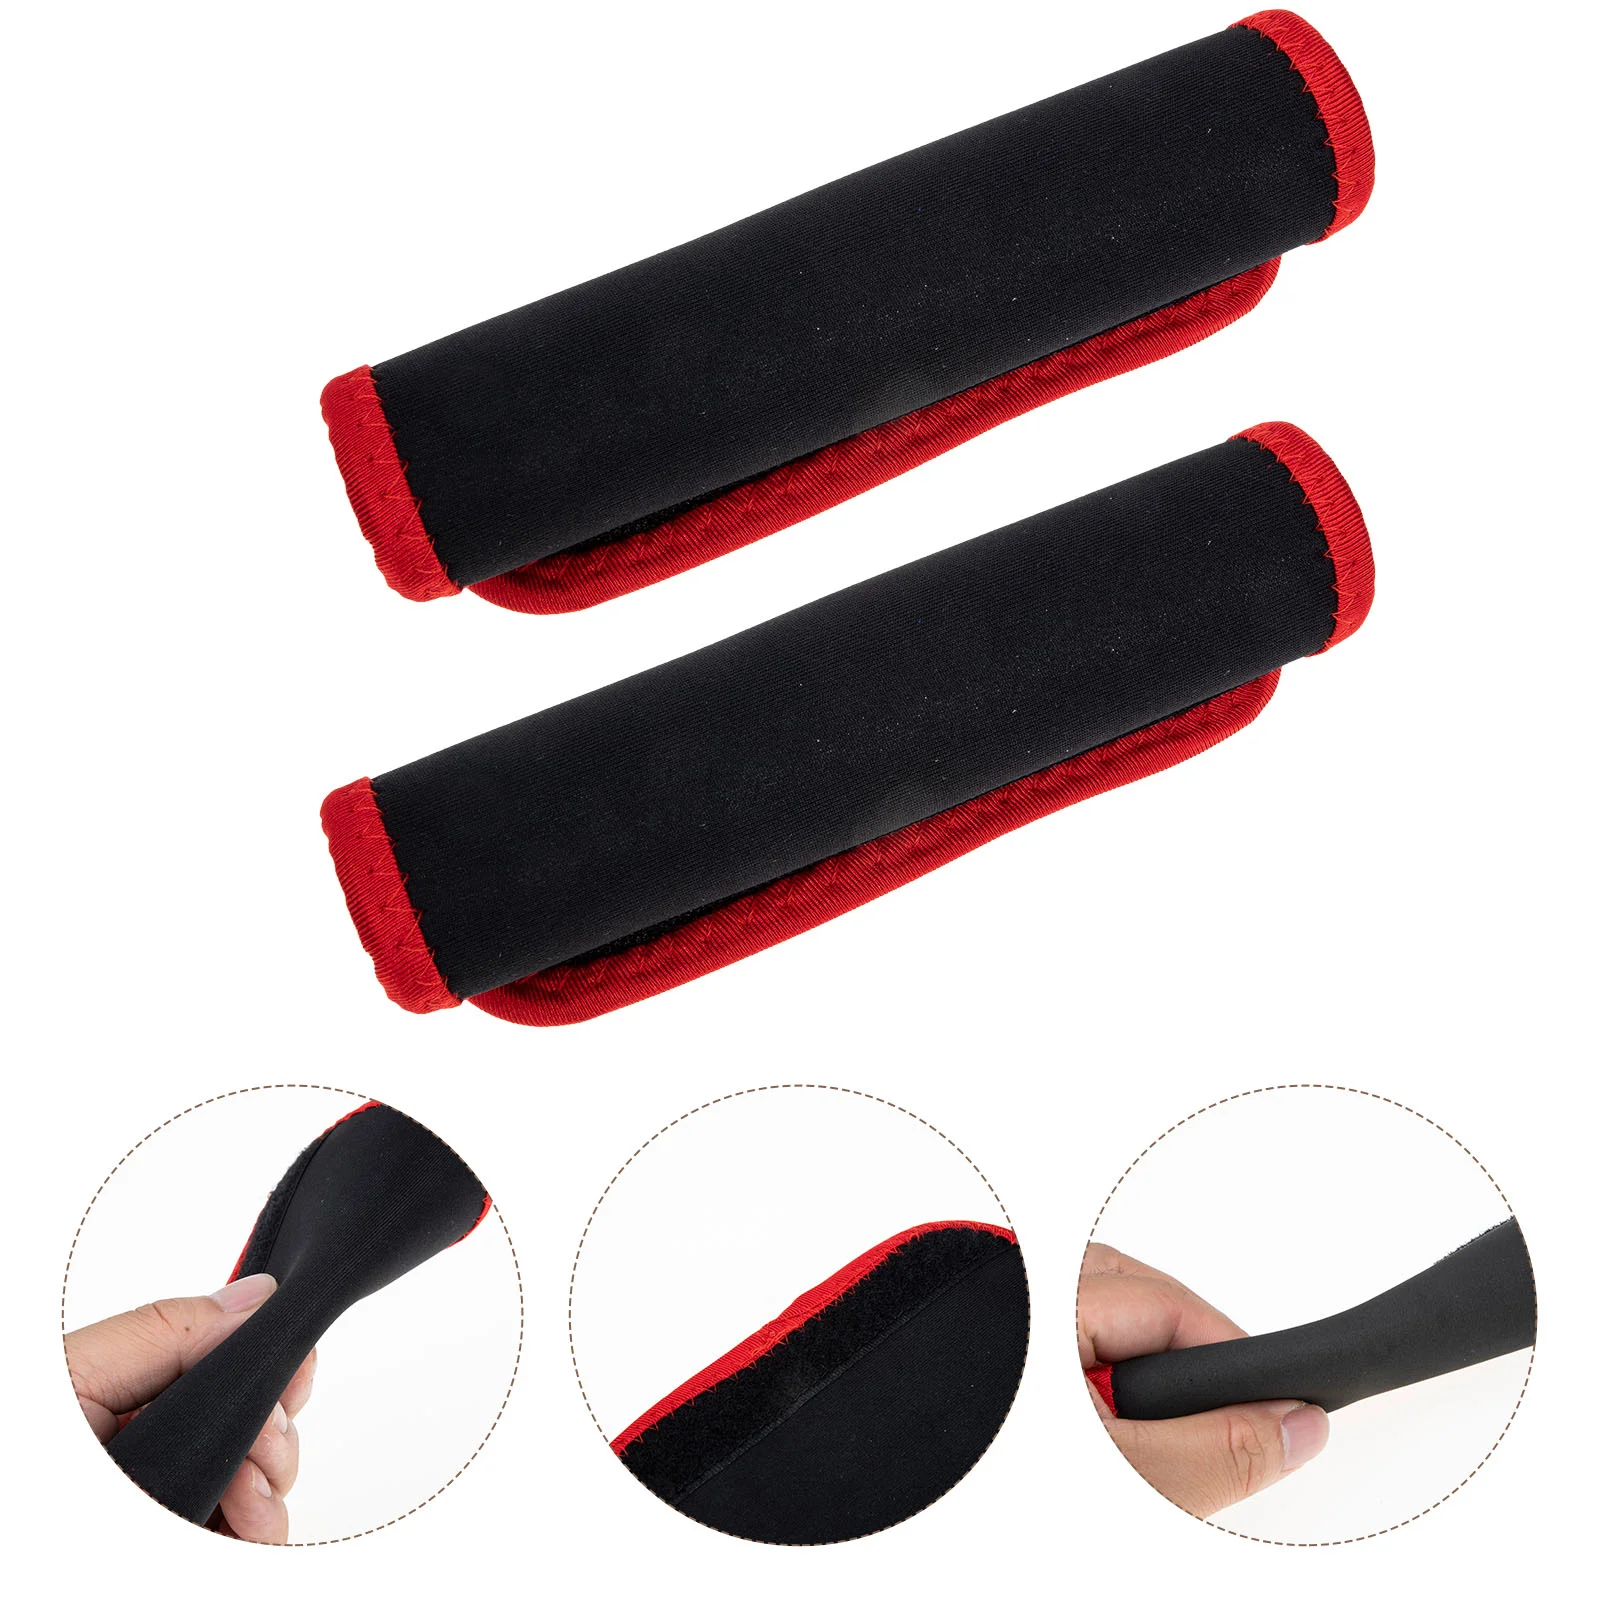 

2 Pcs Barbell Grip Pad Multi-function Lifting Grips Cushions Men Gym Gloves Protection Neoprene Fitness Mens Workout